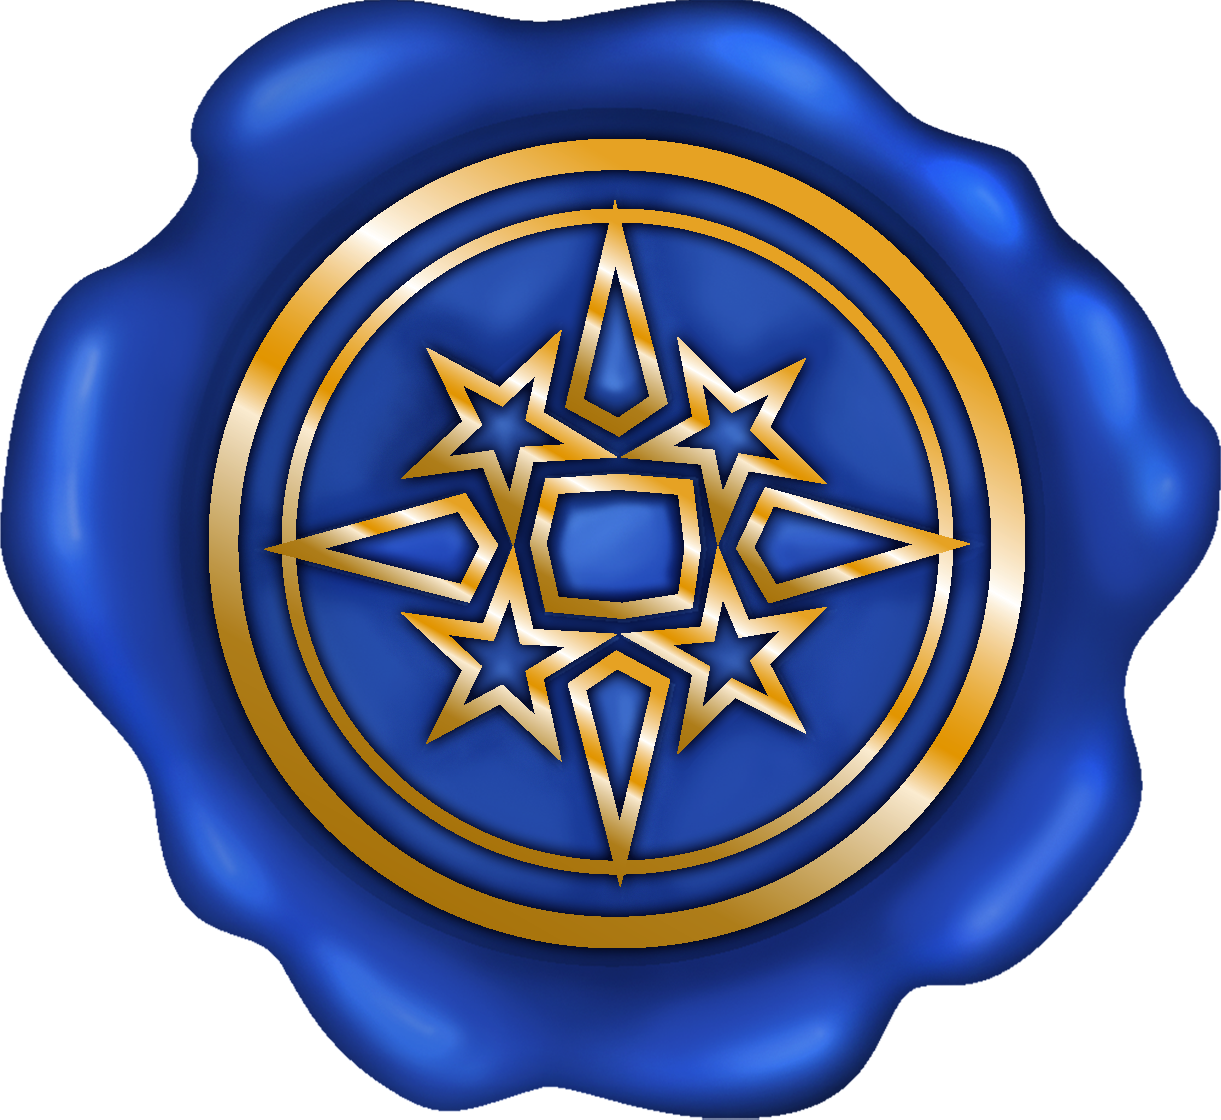 A blue wax stamp with a golden interior pattern.